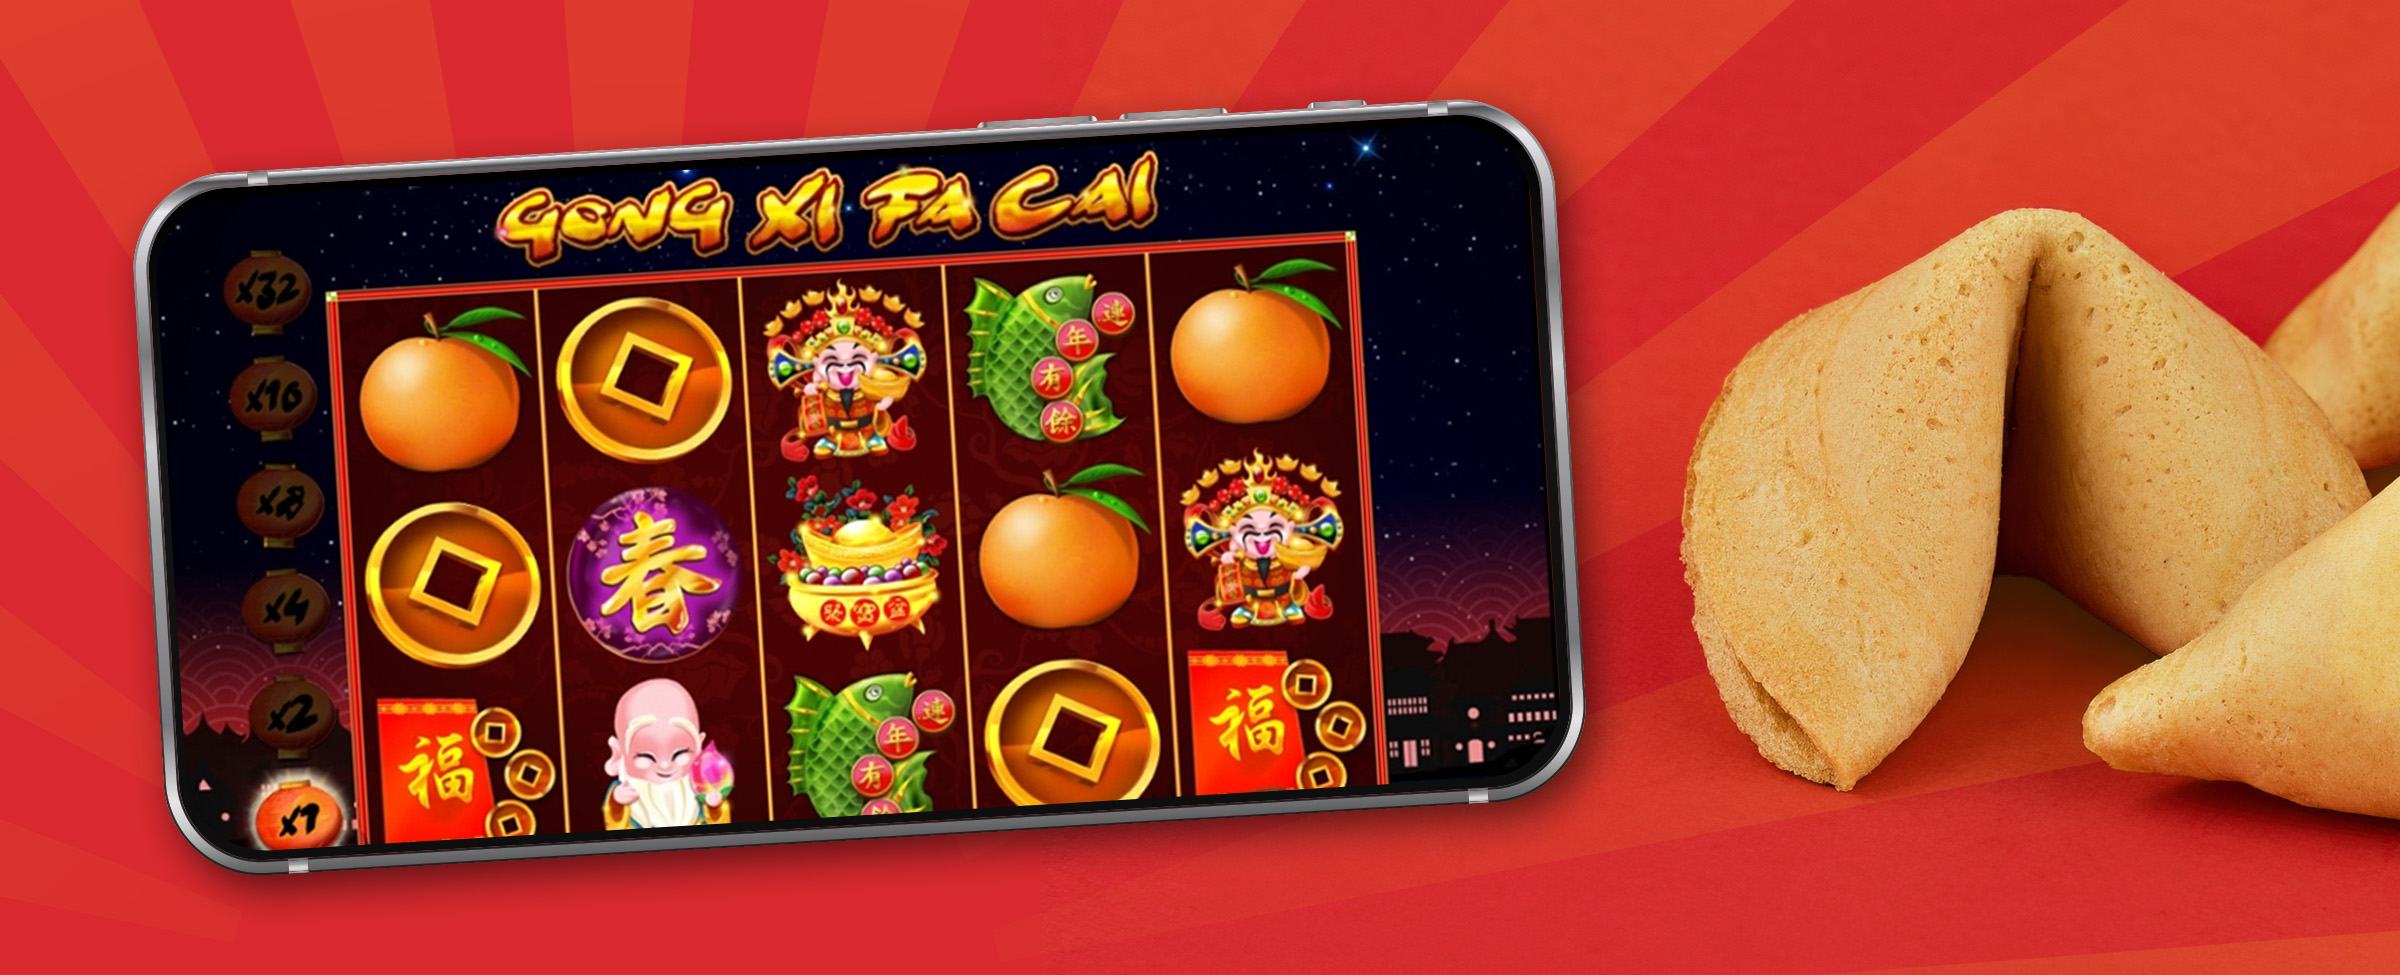 A mobile phone featuring a screenshot from the Cafe Casino slot game, Gongxi Facai, appears next to a cluster of fortune cookies, set on top of a red background.